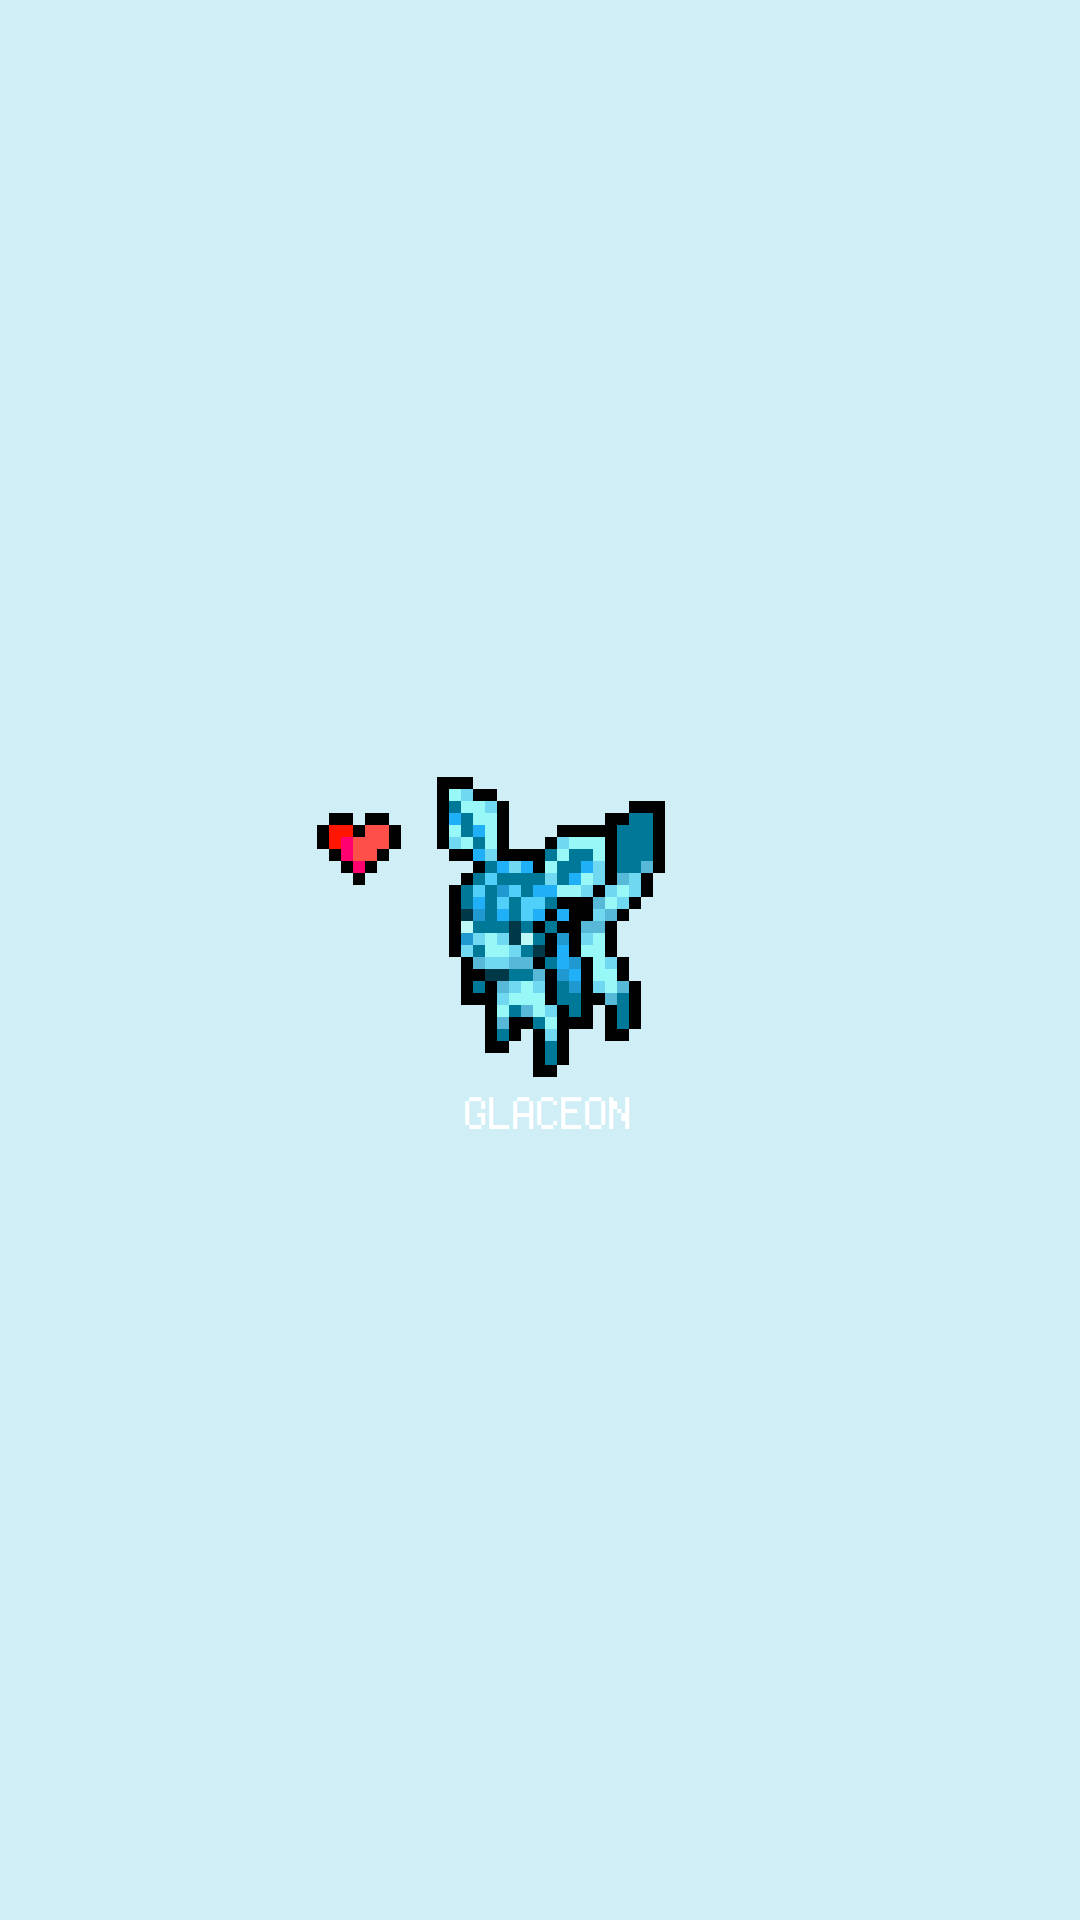 A Pixel Art Glaceon! Background